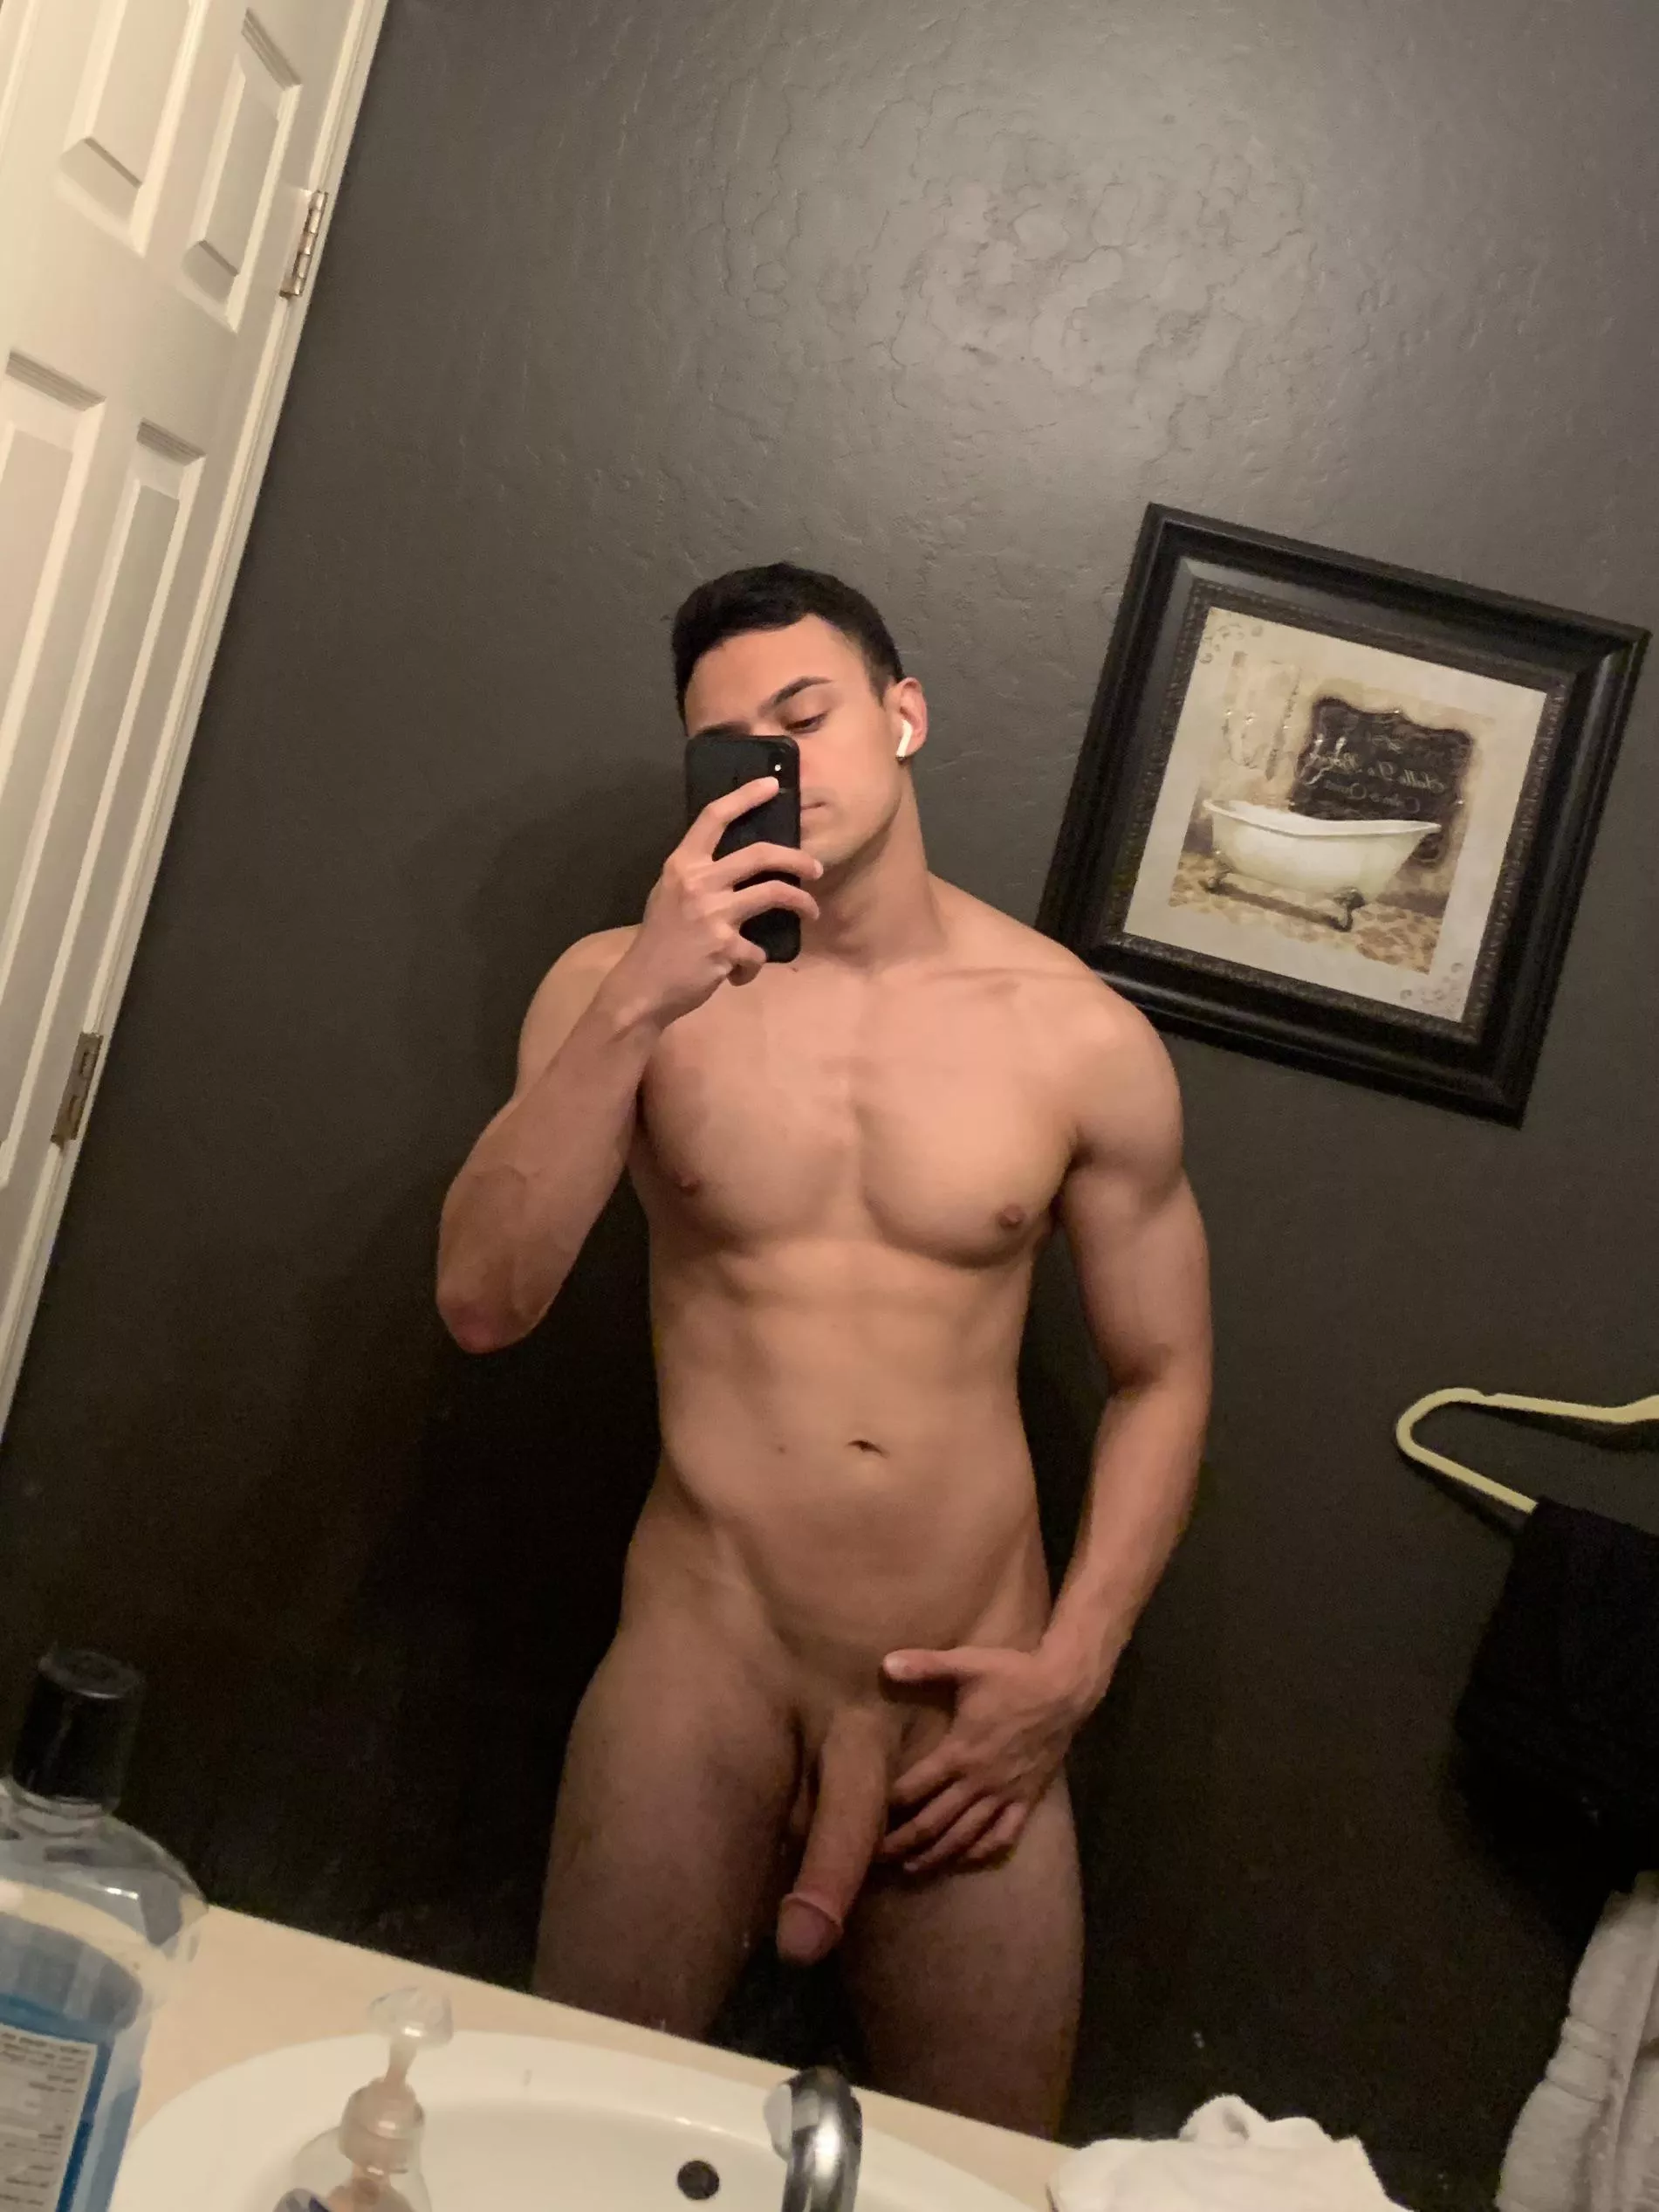 Perfect Dick Porn - Been told I have a perfect dick, enjoyðŸ¤­ nudes by Pixeldaddyy